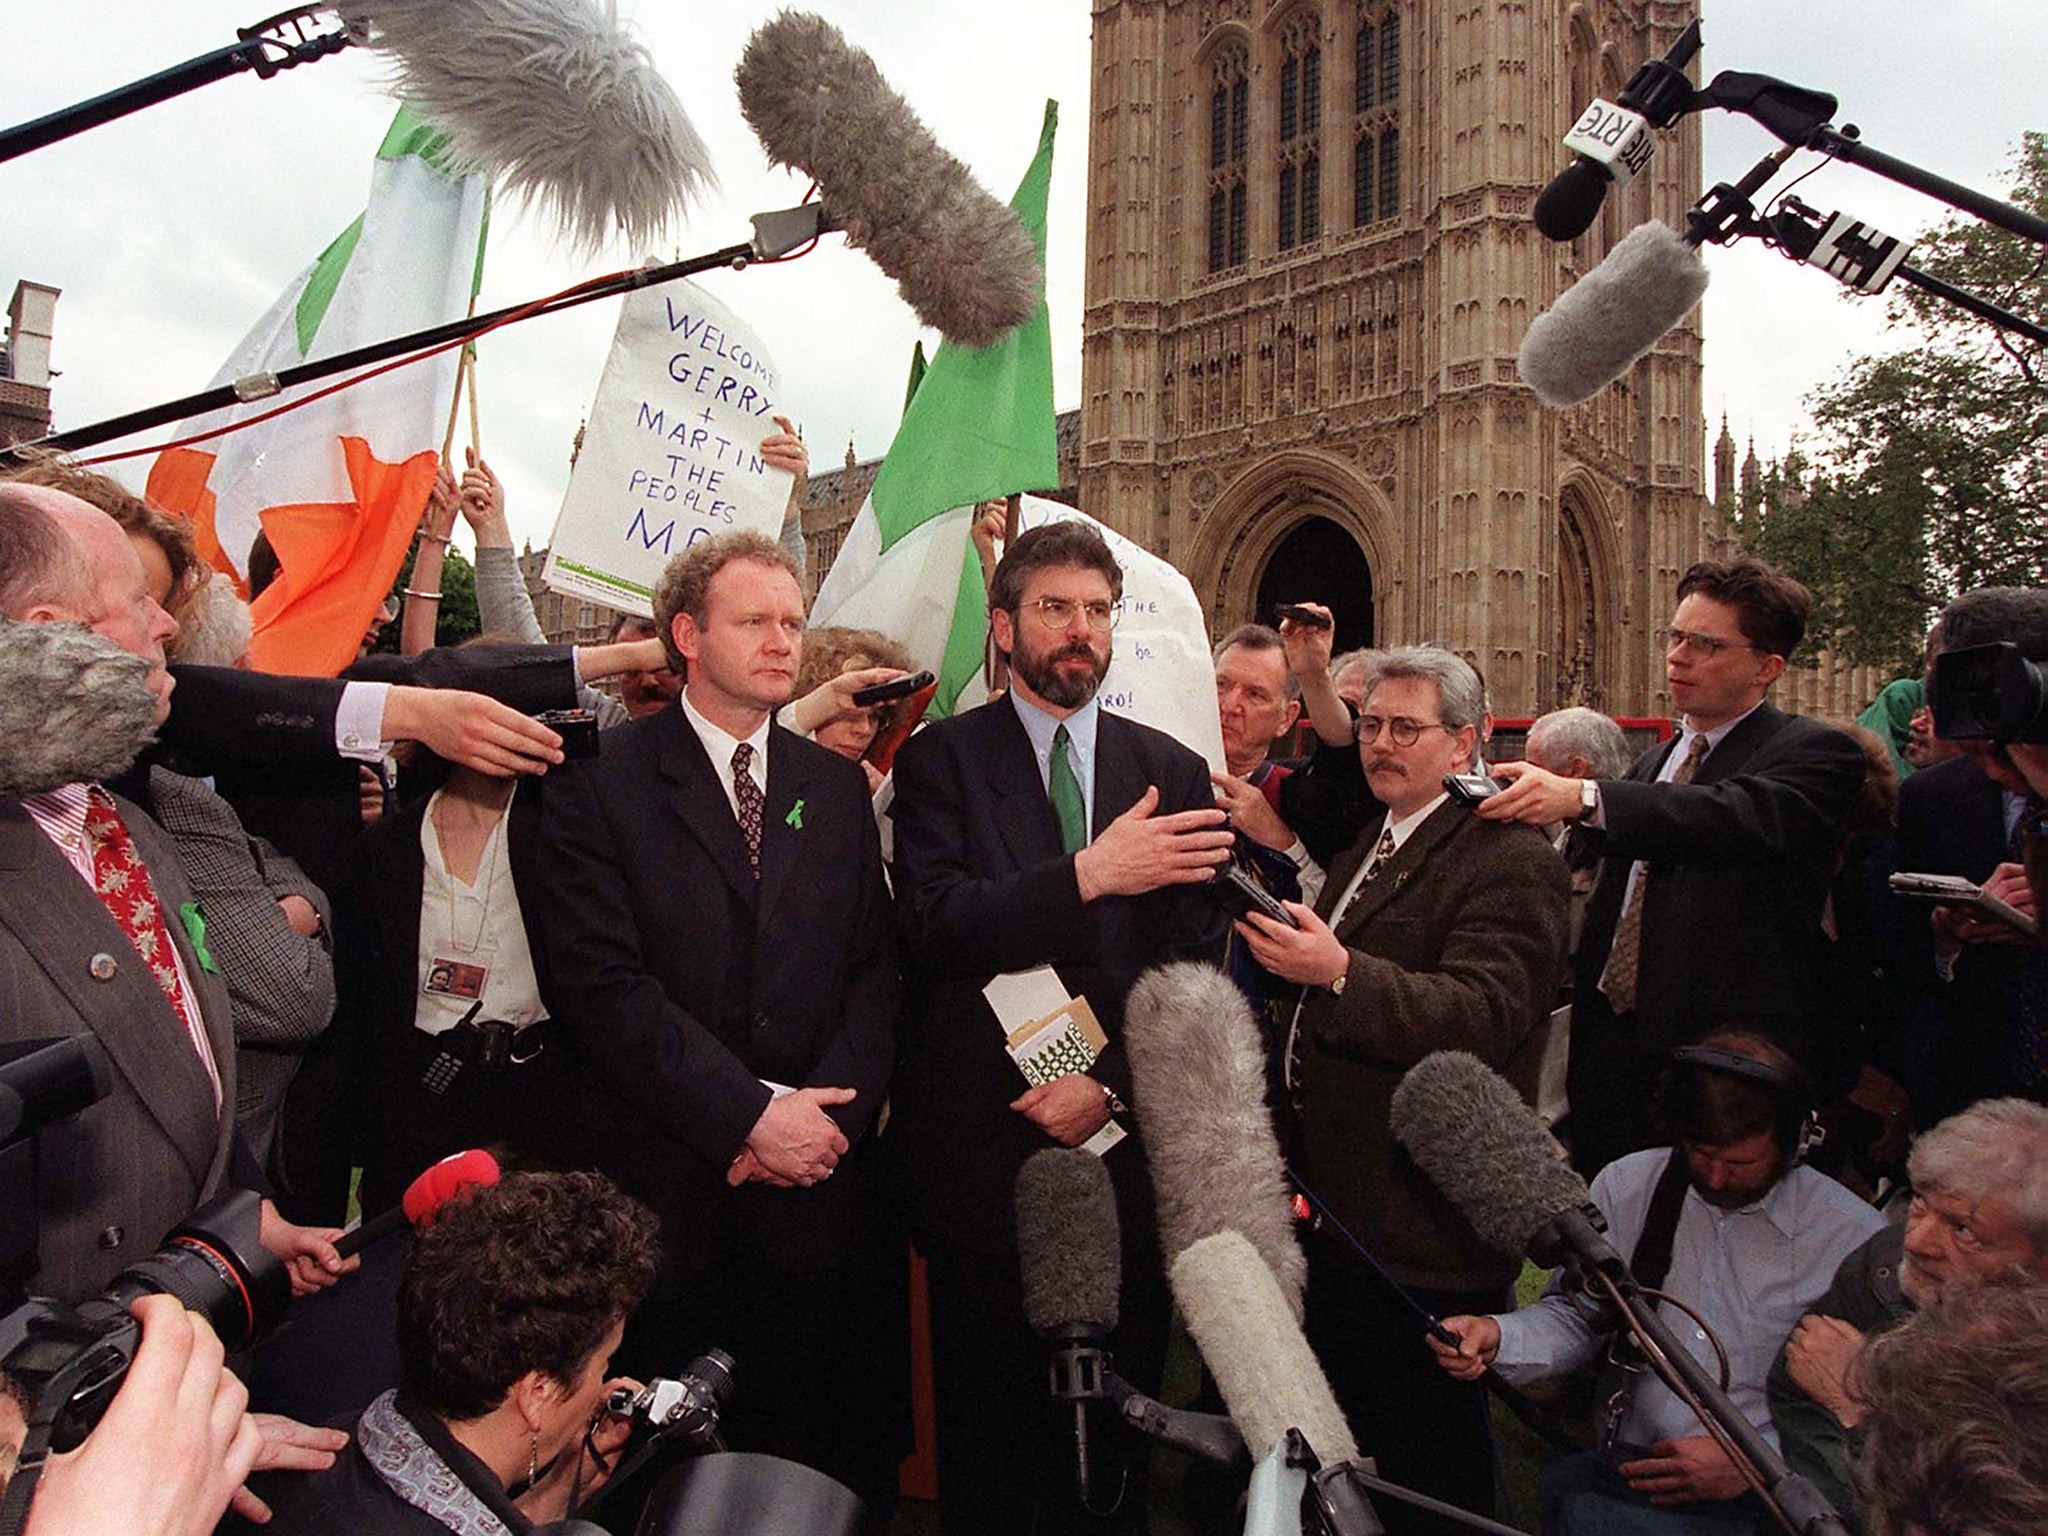 Newly elected Sinn Fein MPs McGuinness and Adams in May 1997 after challenging an order barring them from Parliament for refusing to swear allegiance to the Queen